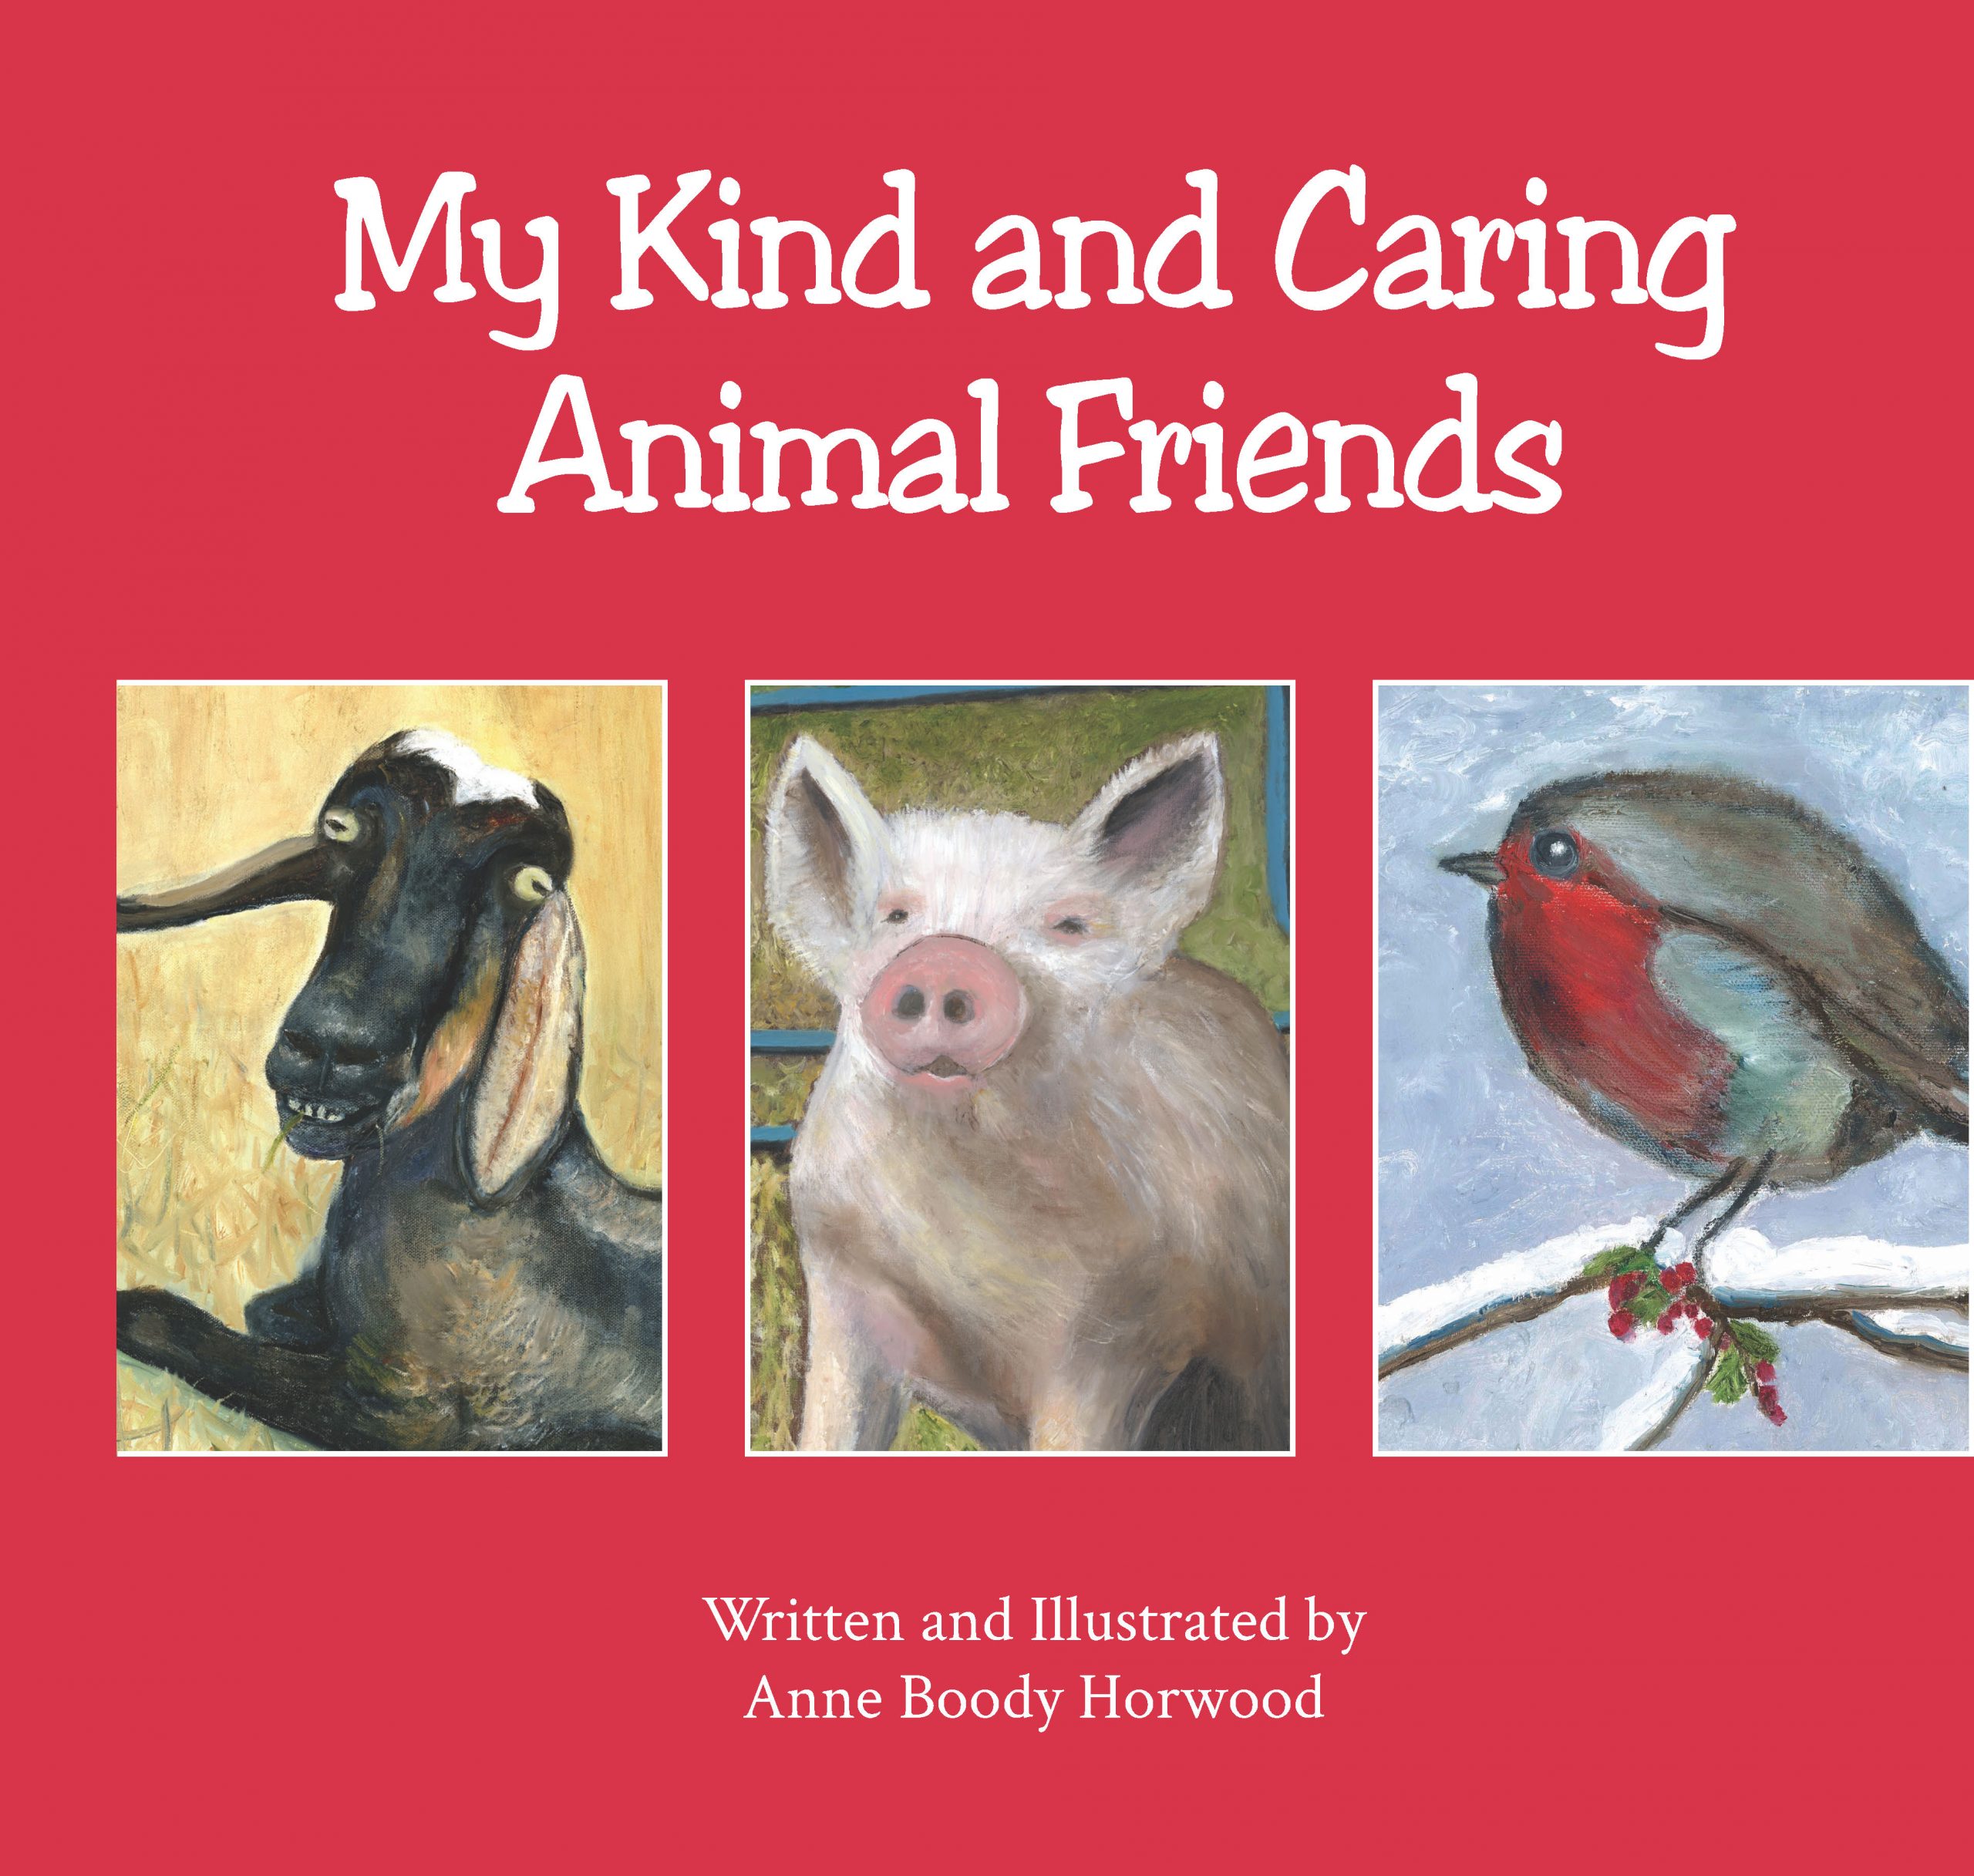 Kind and Caring Animal Friends